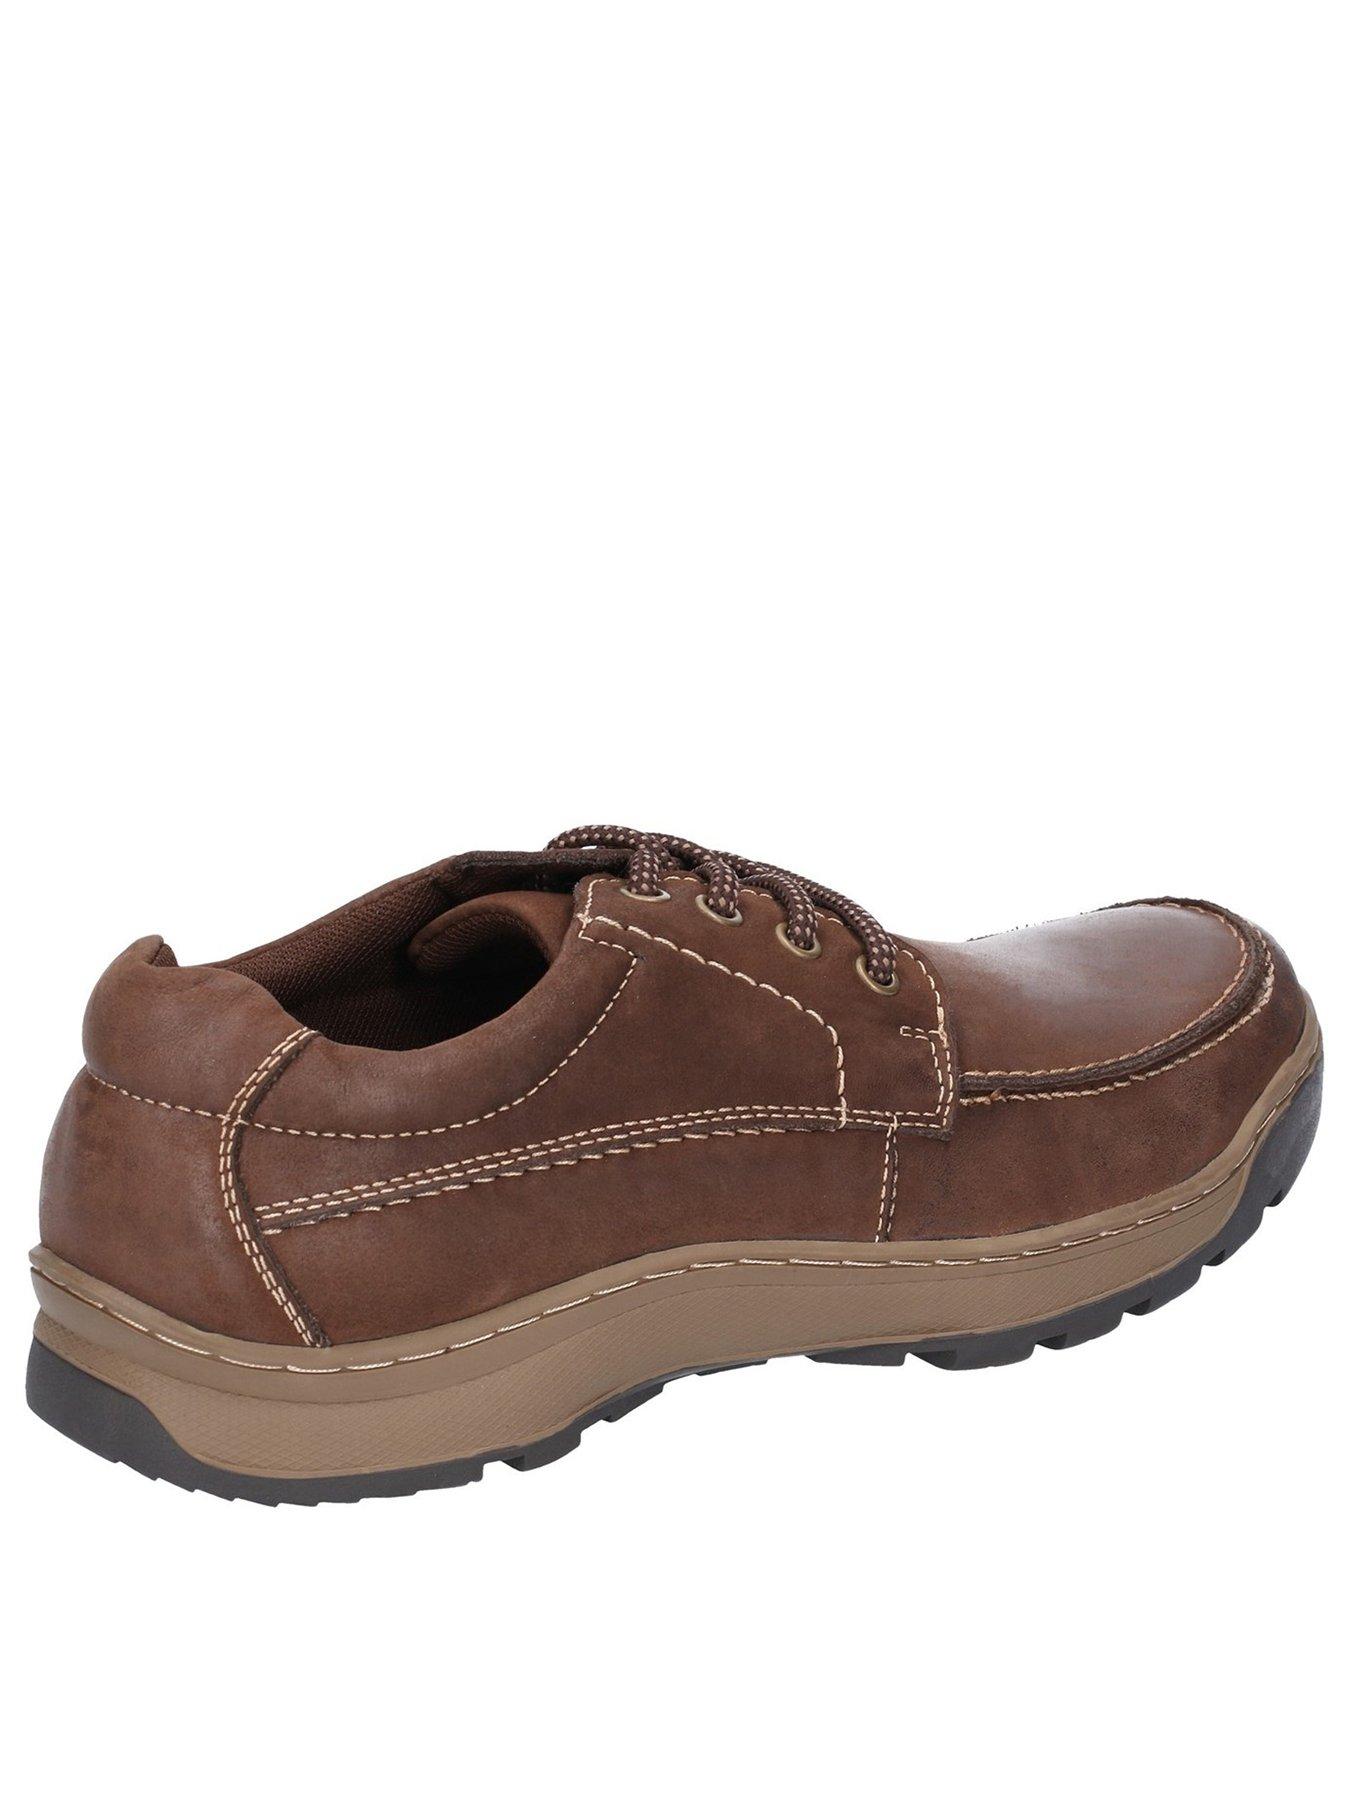 Hush Puppies Tucker Lace Up Shoes - Brown | very.co.uk